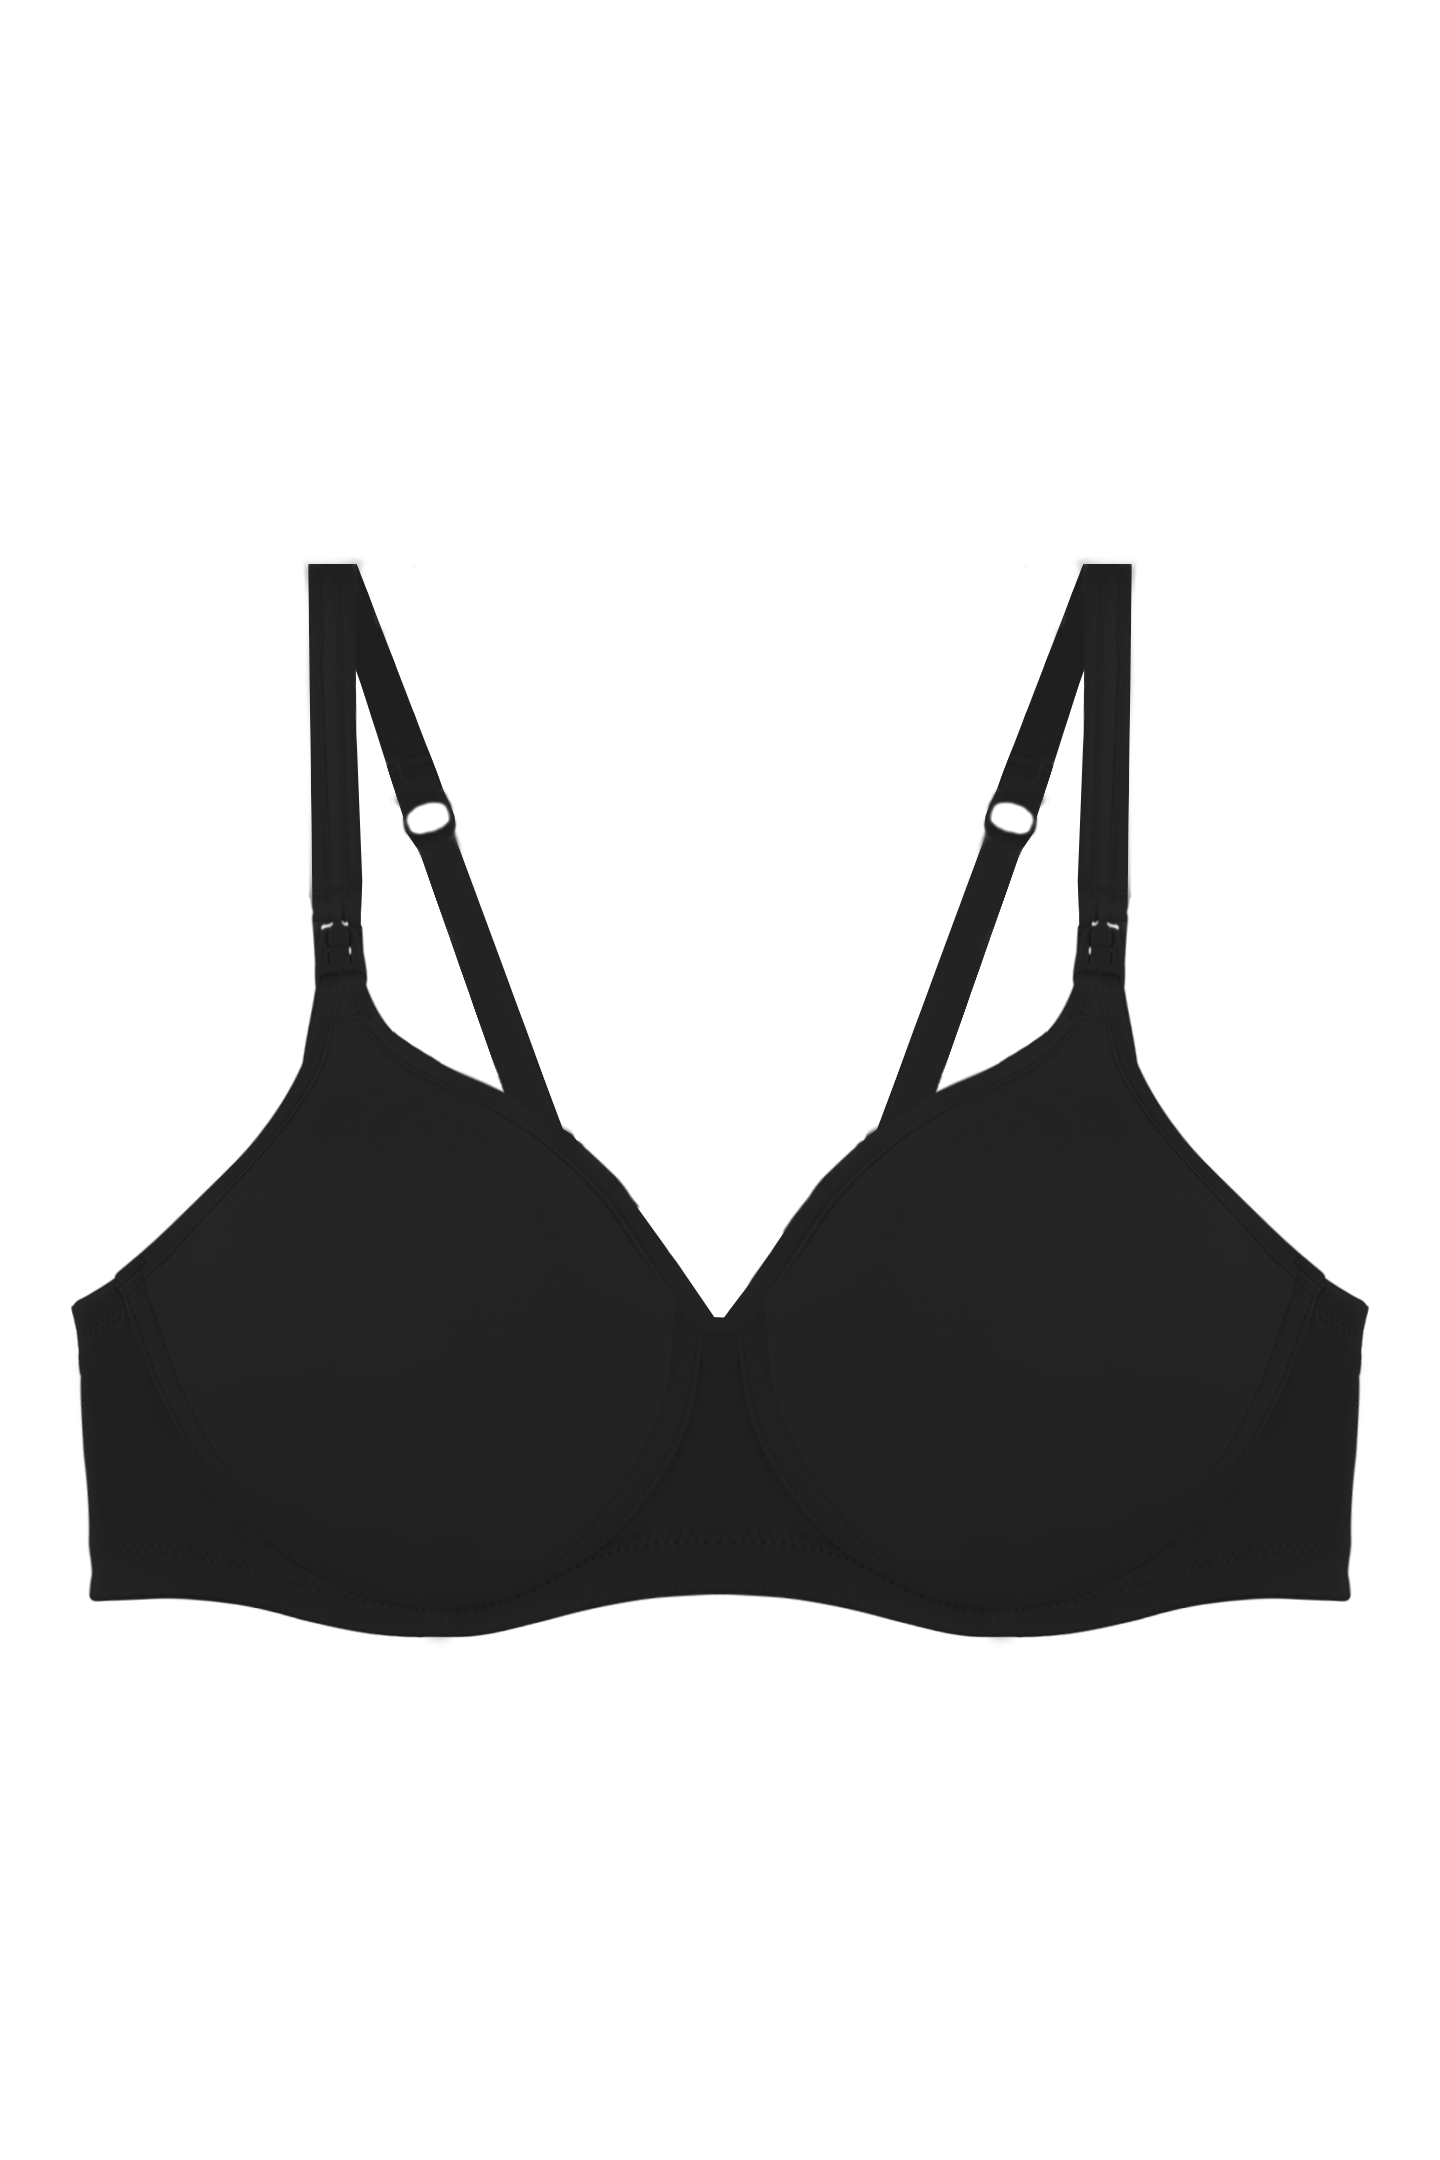 Buy MATERNITY CONTOUR BRA online at Intimo